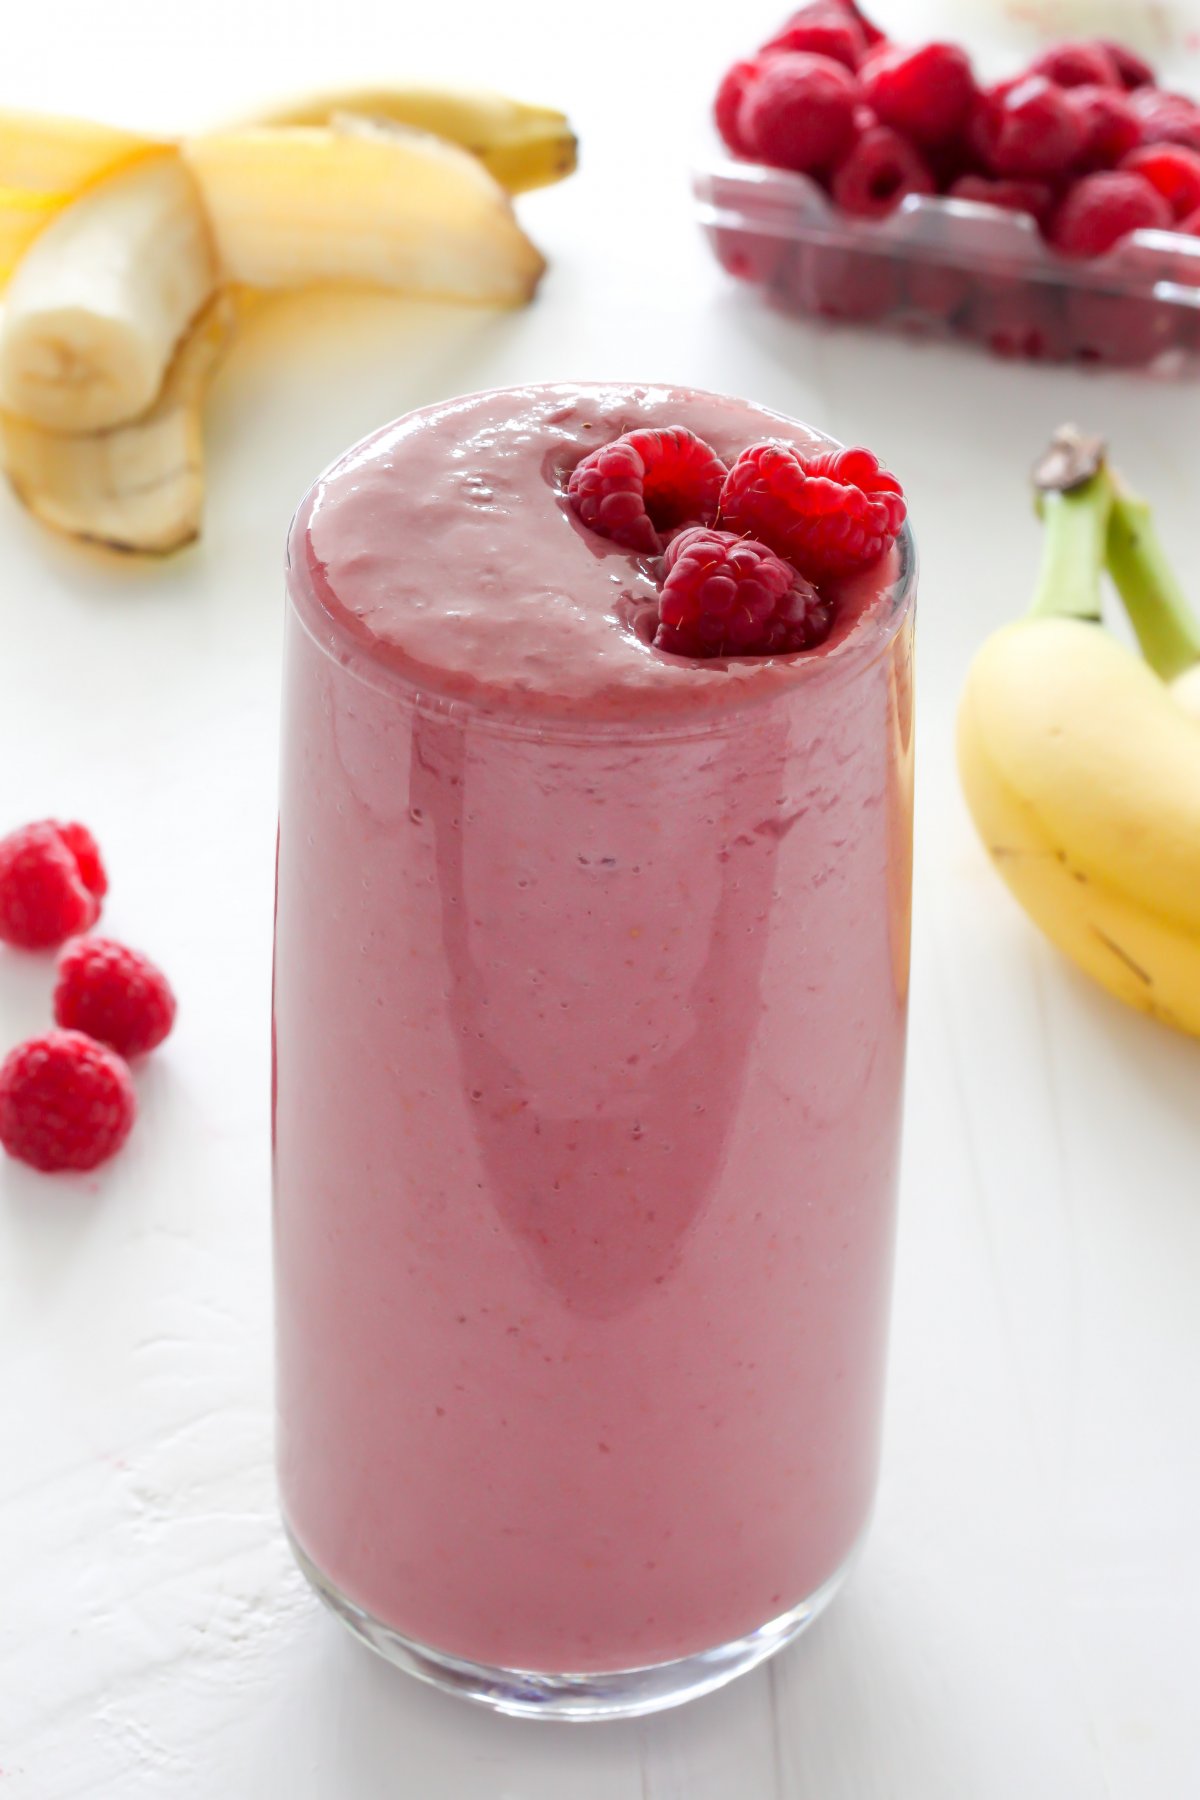 Raspberry Banana Smoothie Baker By Nature